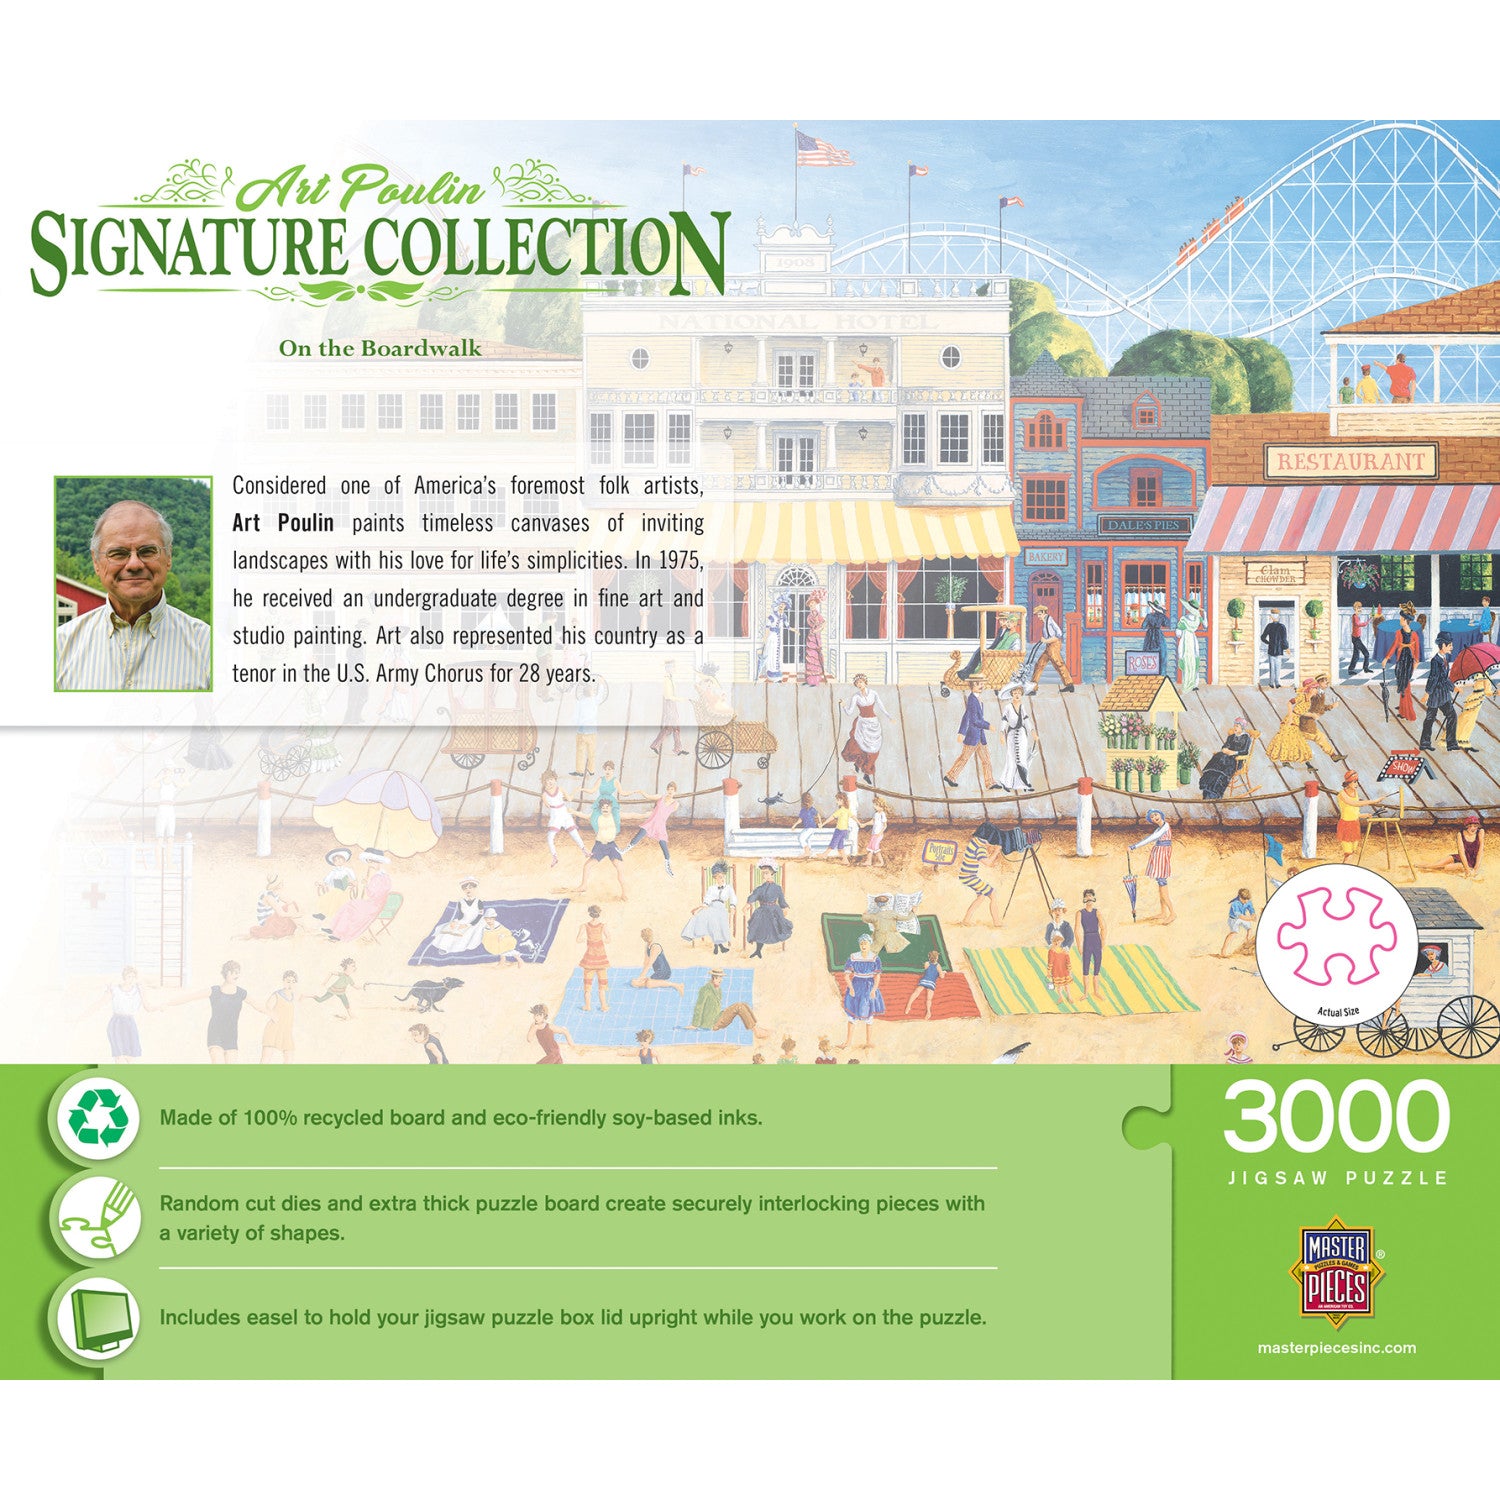 Signature Collection - On the Boardwalk 3000 Piece Jigsaw Puzzle